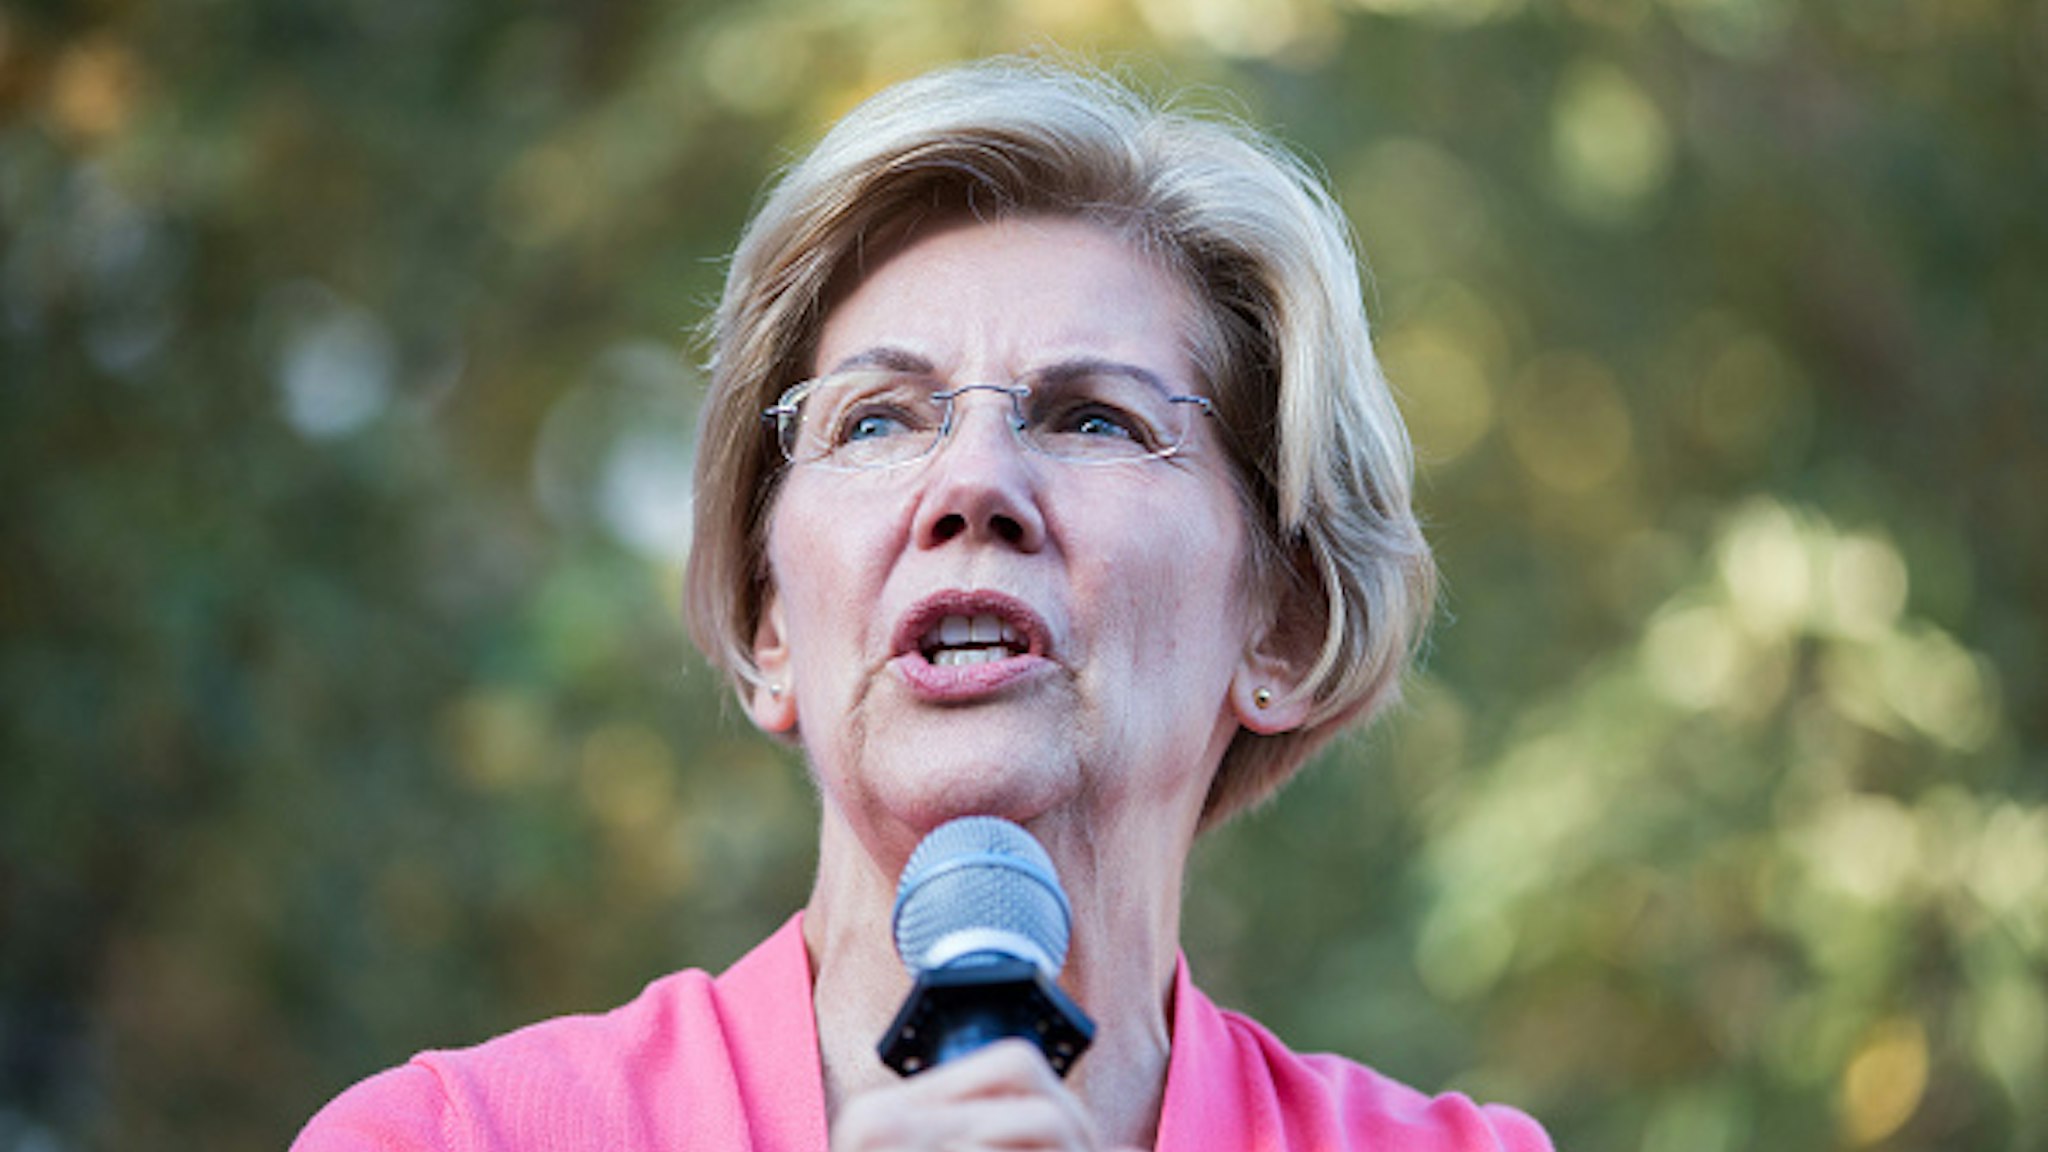 KEENE, NH - SEPTEMBER 25: Democratic presidential candidate Sen. Elizabeth Warren (D-MA) speaks during a Town Hall at Keene State College on September 25, 2019 in Keene, New Hampshire. Warren's candidacy has been surging recently, with some polls showing her leading or virtually tied with Joe Biden at the top of the Democratic field.